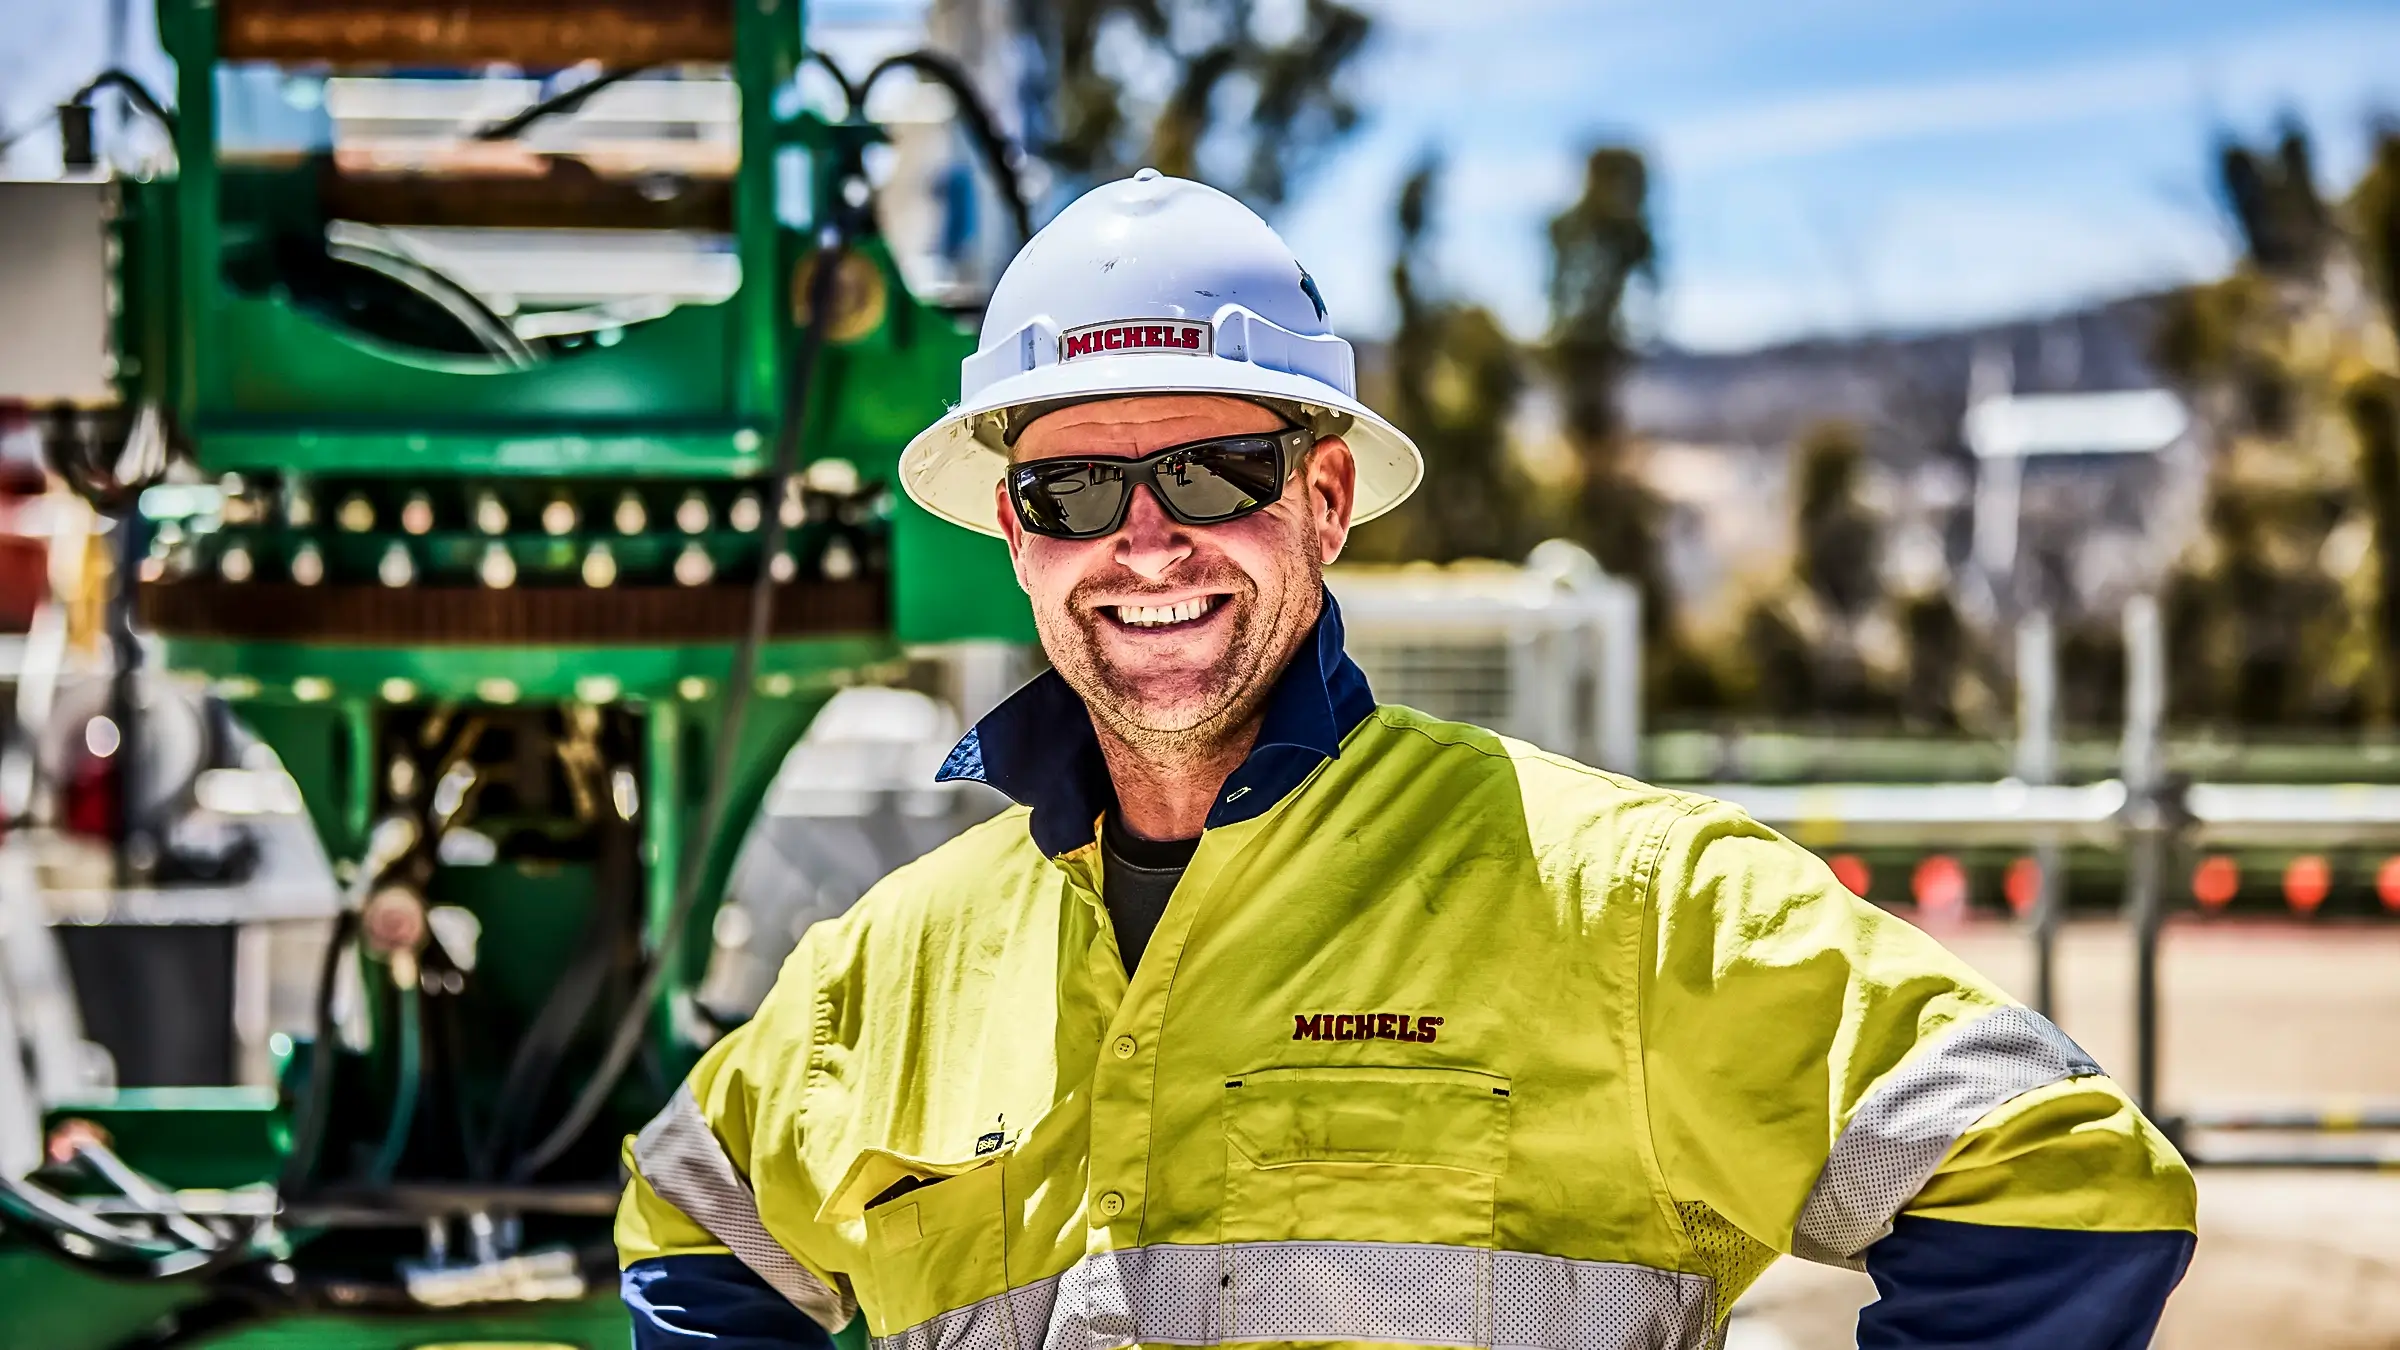 A crew member smiling happily on a jobsite